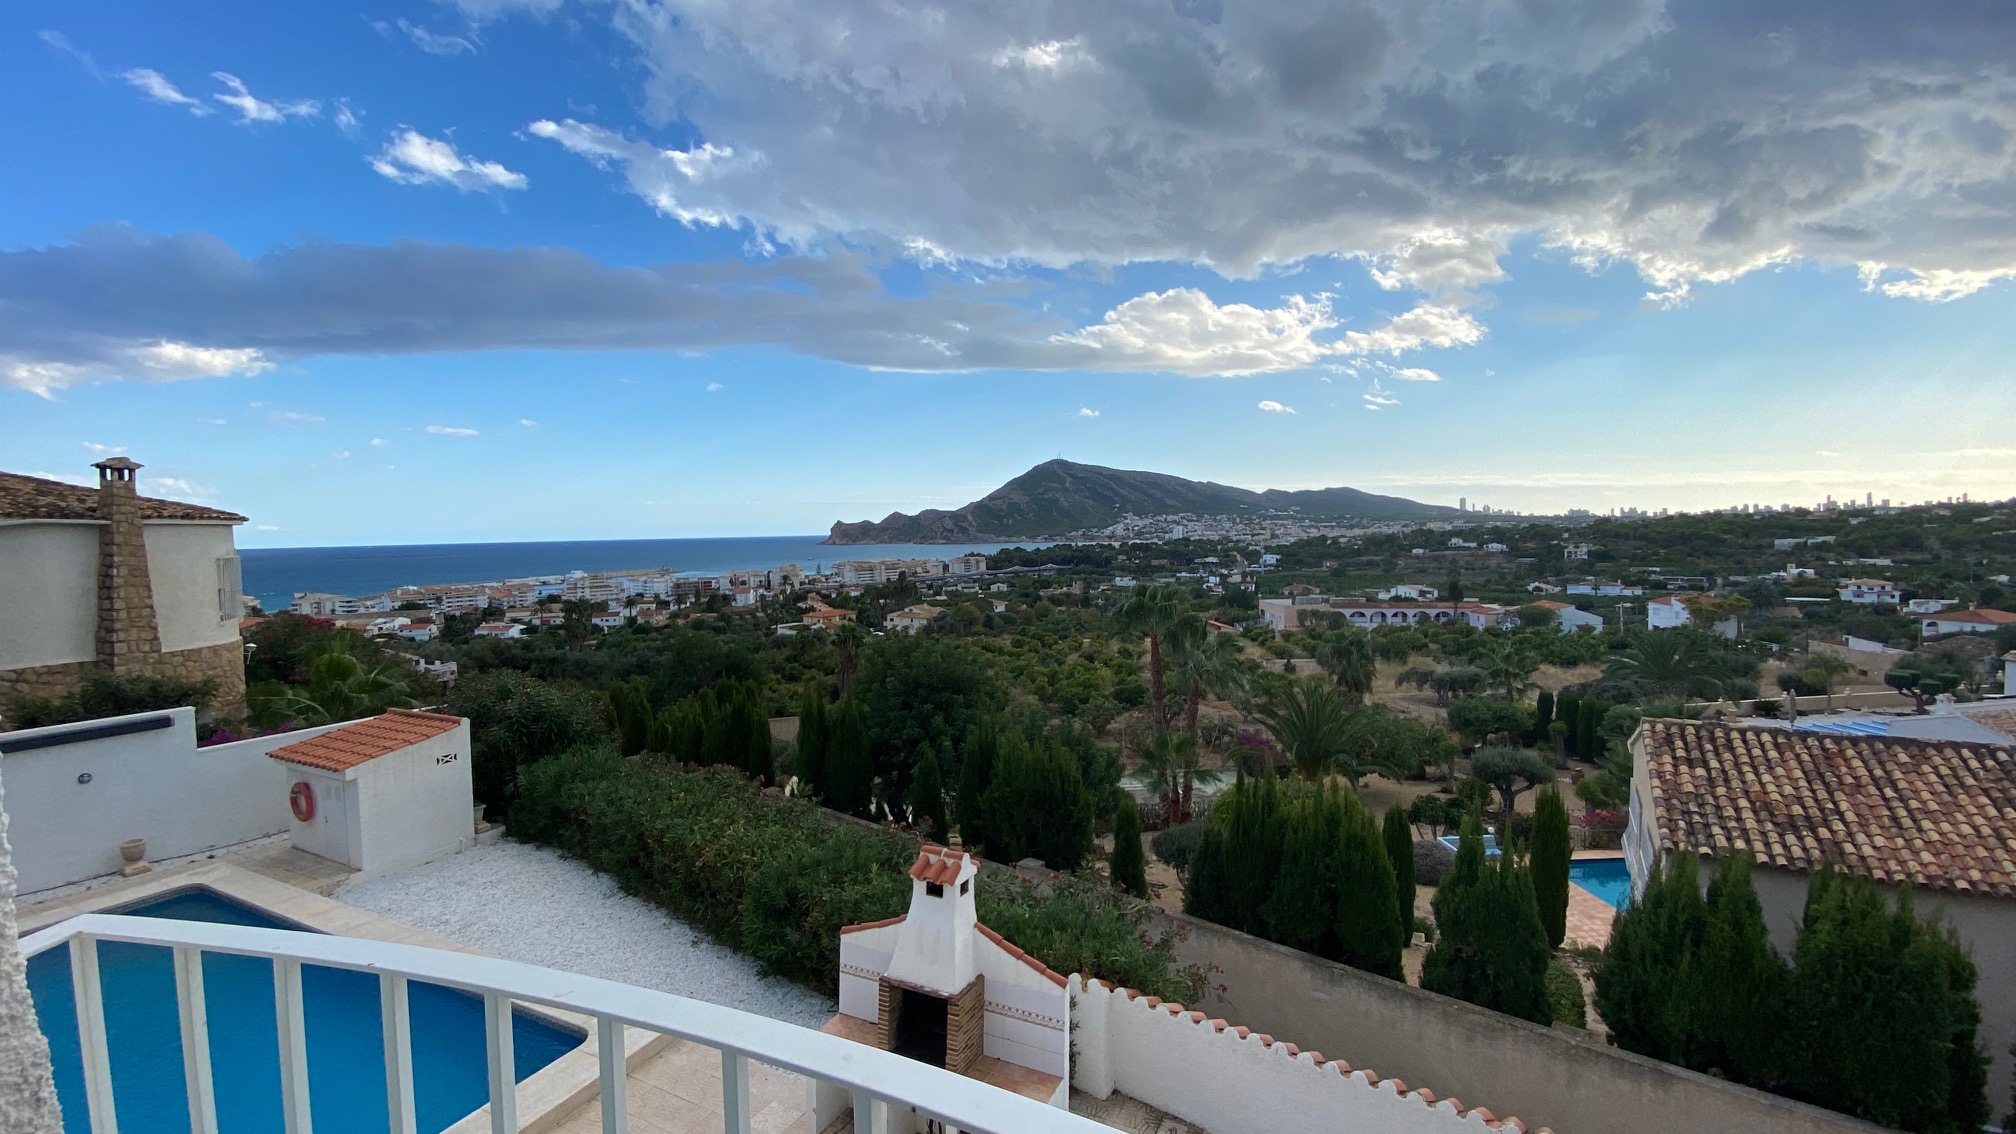 Villa in Altea with four bedrooms and two full bathrooms with unbeatable views of the bay of Altea. Private pool. Near the sea and old town.